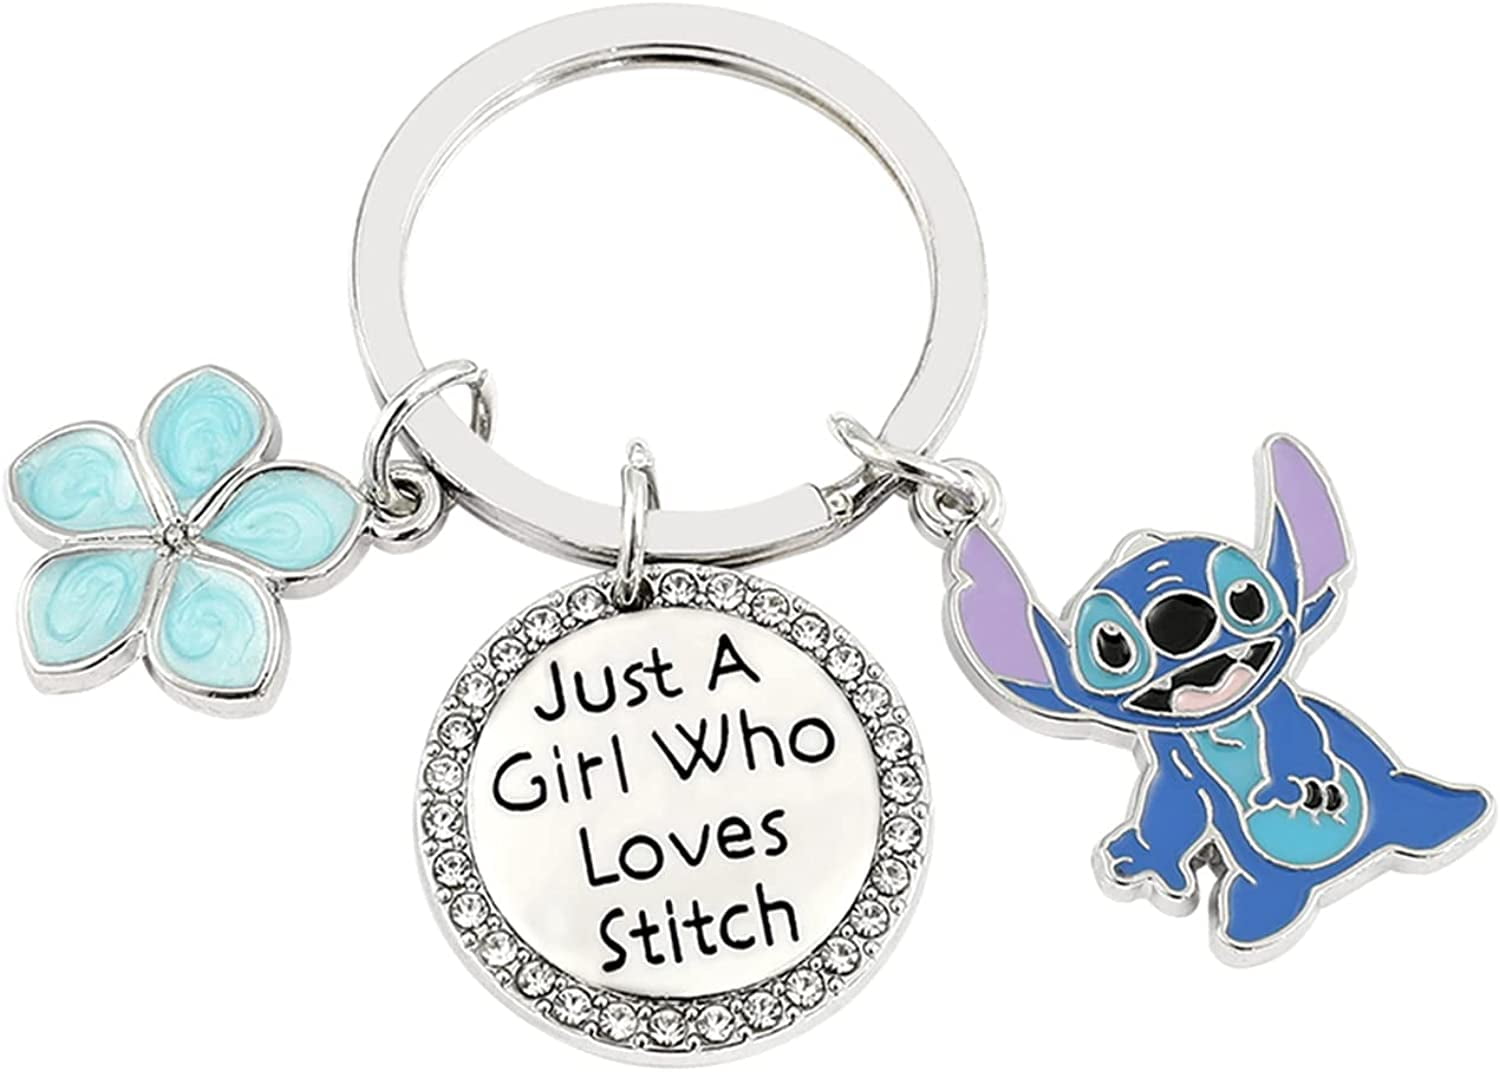 We have enough Stitch products for the whole Ohana! From luggage tags and  lanyards to necklaces and earrings, our Lilo and Stitch…